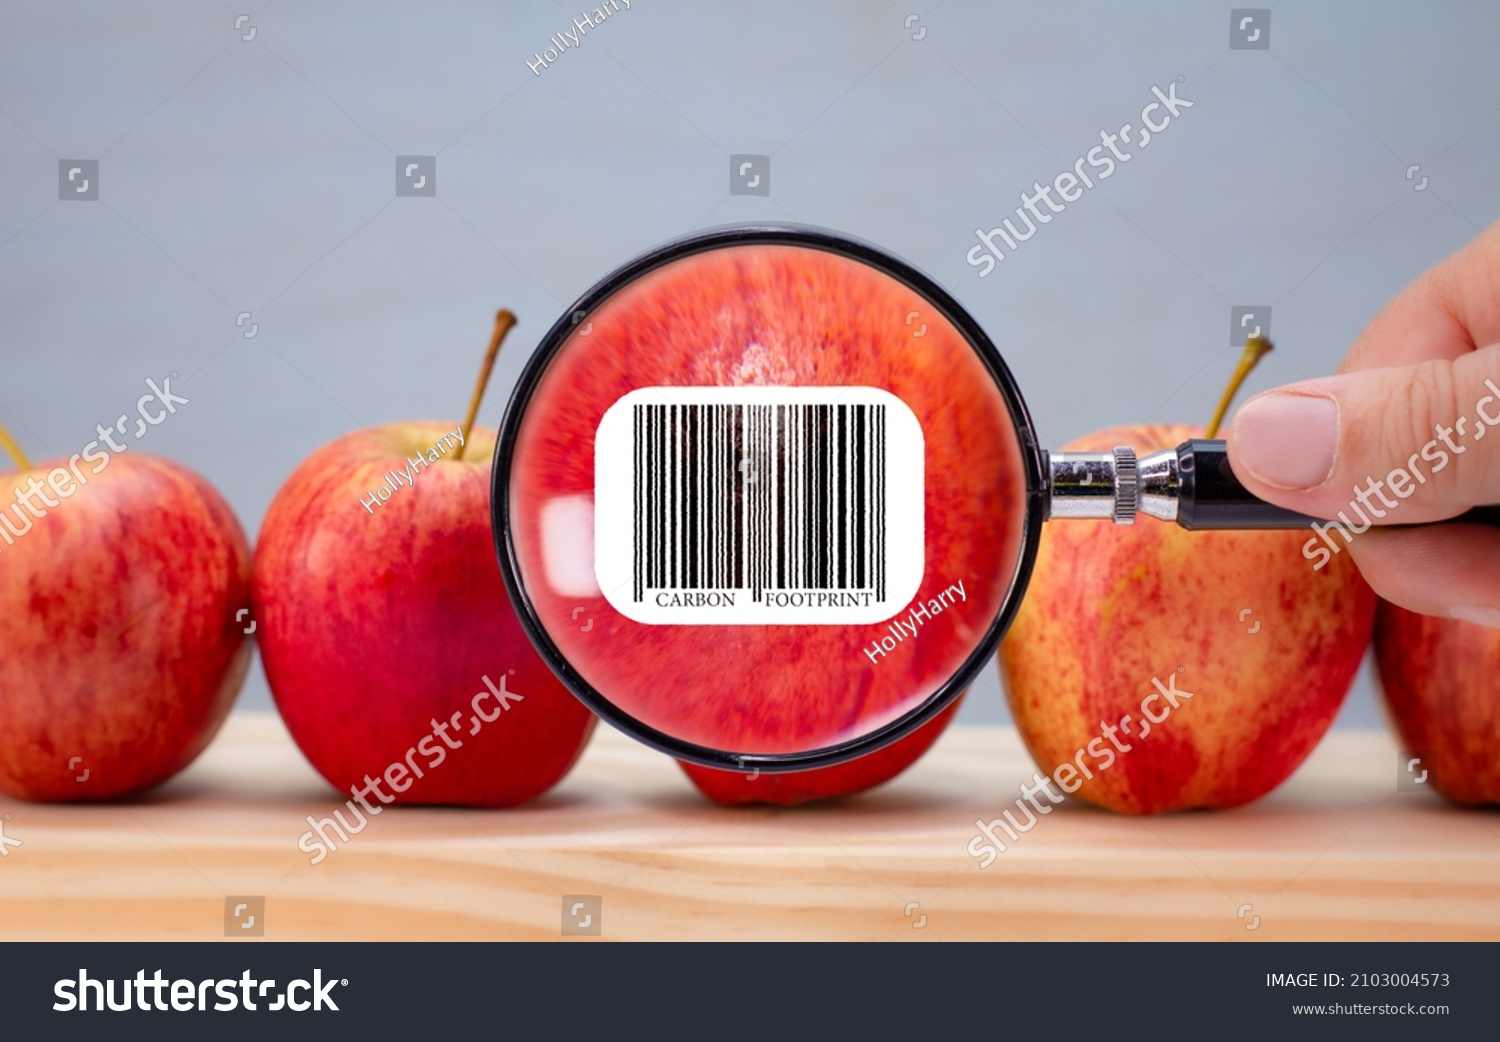 Carbon footprint bar code label on apple magnified by magnifying lens, environmental impact of food customer sustainability label on food #2103004573